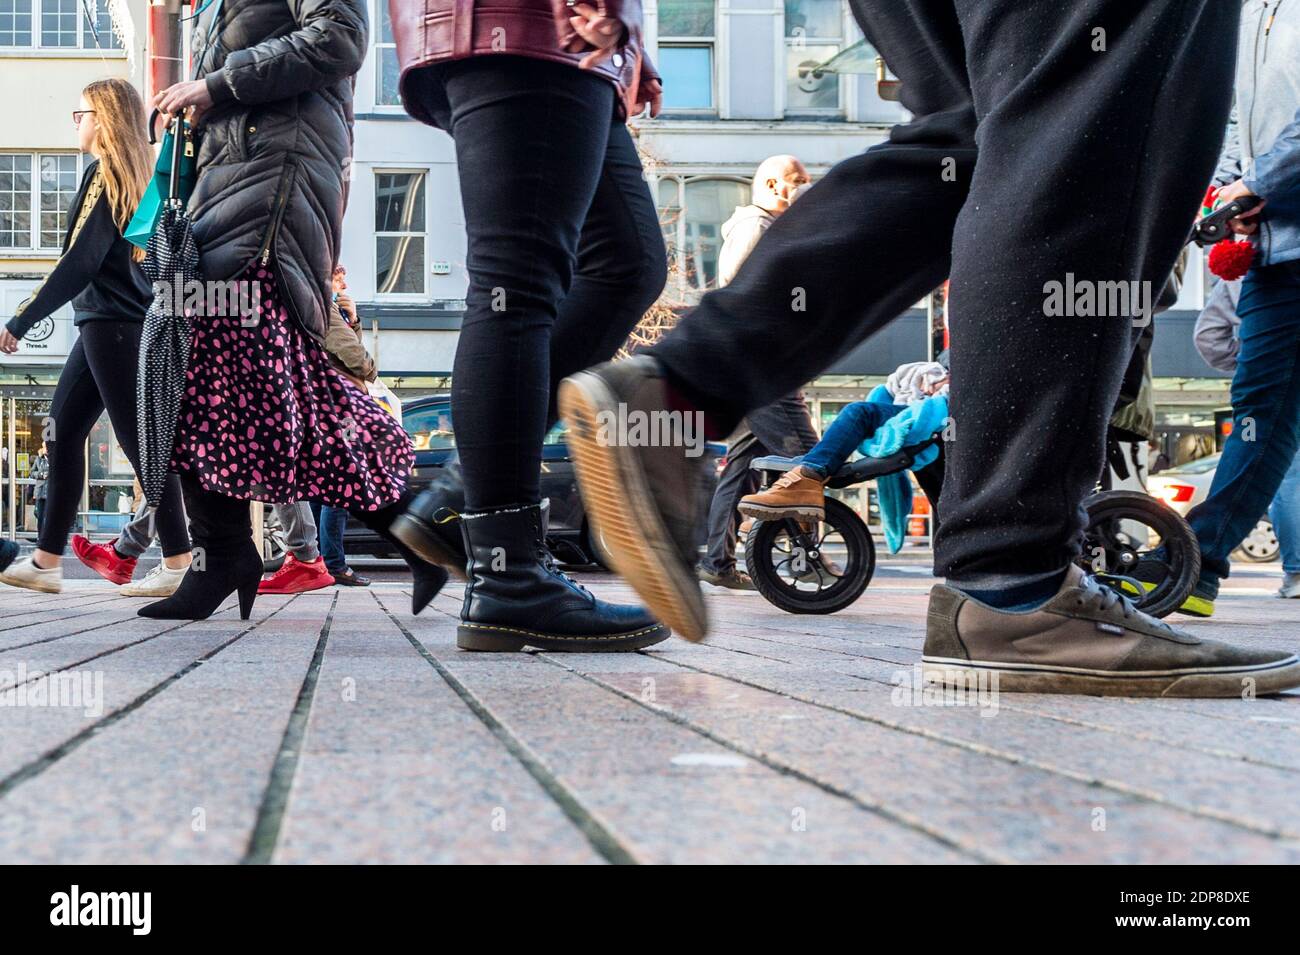 Cork, Ireland. 19th Dec, 2020. Cork city centre was packed with shoppers  today, on the last Saturday before Christmas. Shops, coffee shops and  restaurants were doing a brisk trade before a possible